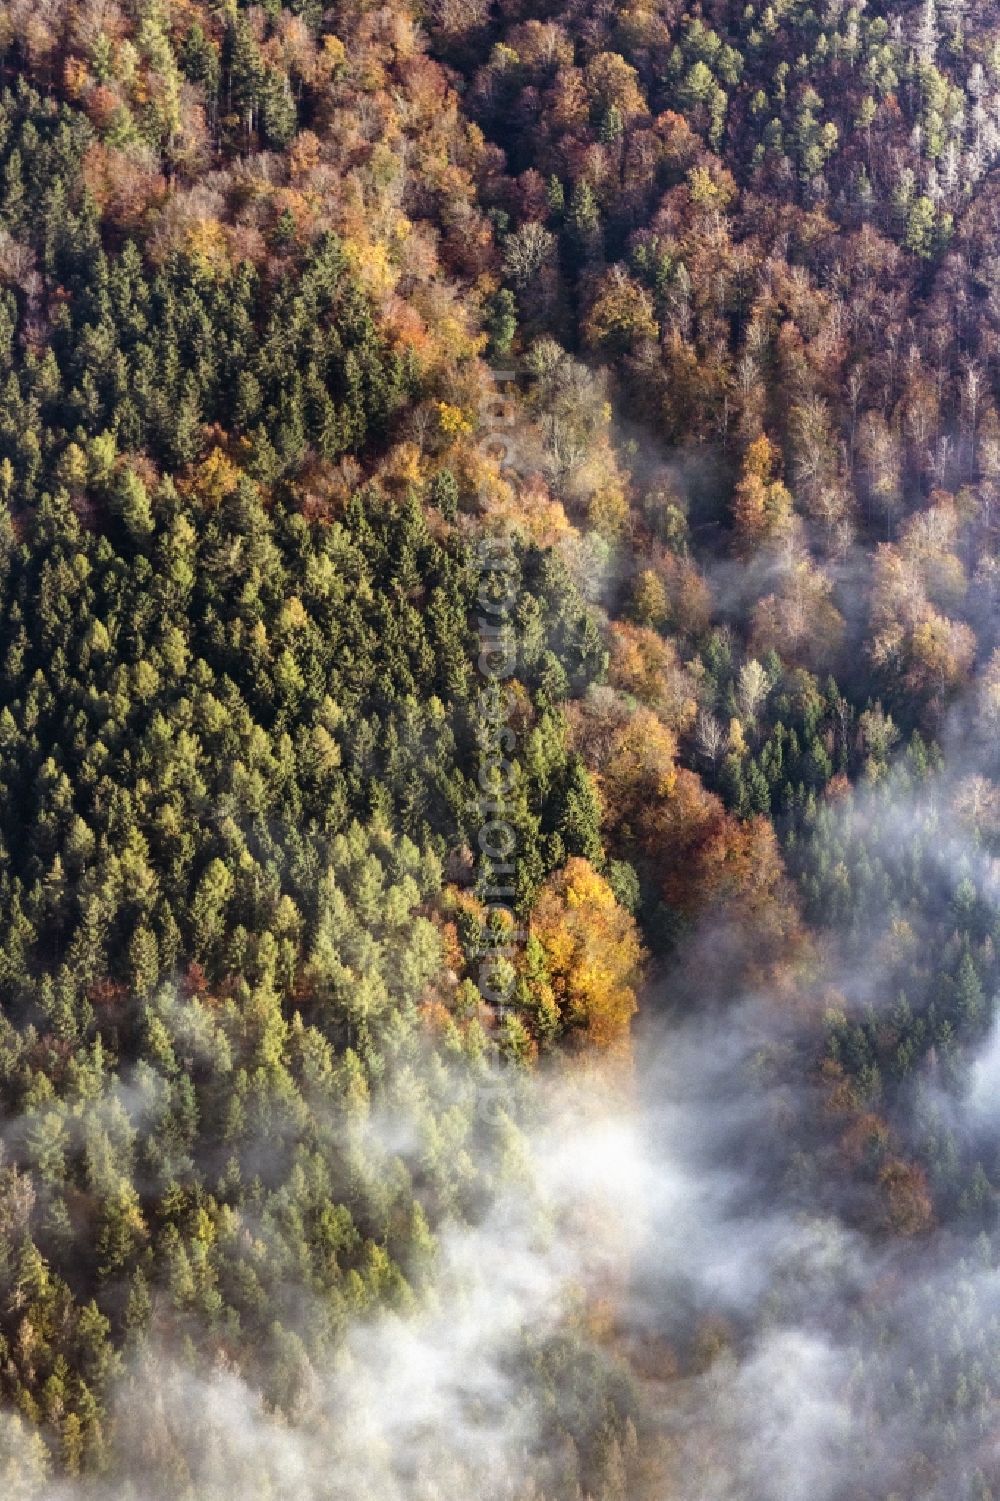 Haina (Kloster) from the bird's eye view: Autumnal discolored vegetation view weather conditions with cloud formation ueber einem Wald in Bad Wildungen in the state Hesse, Germany